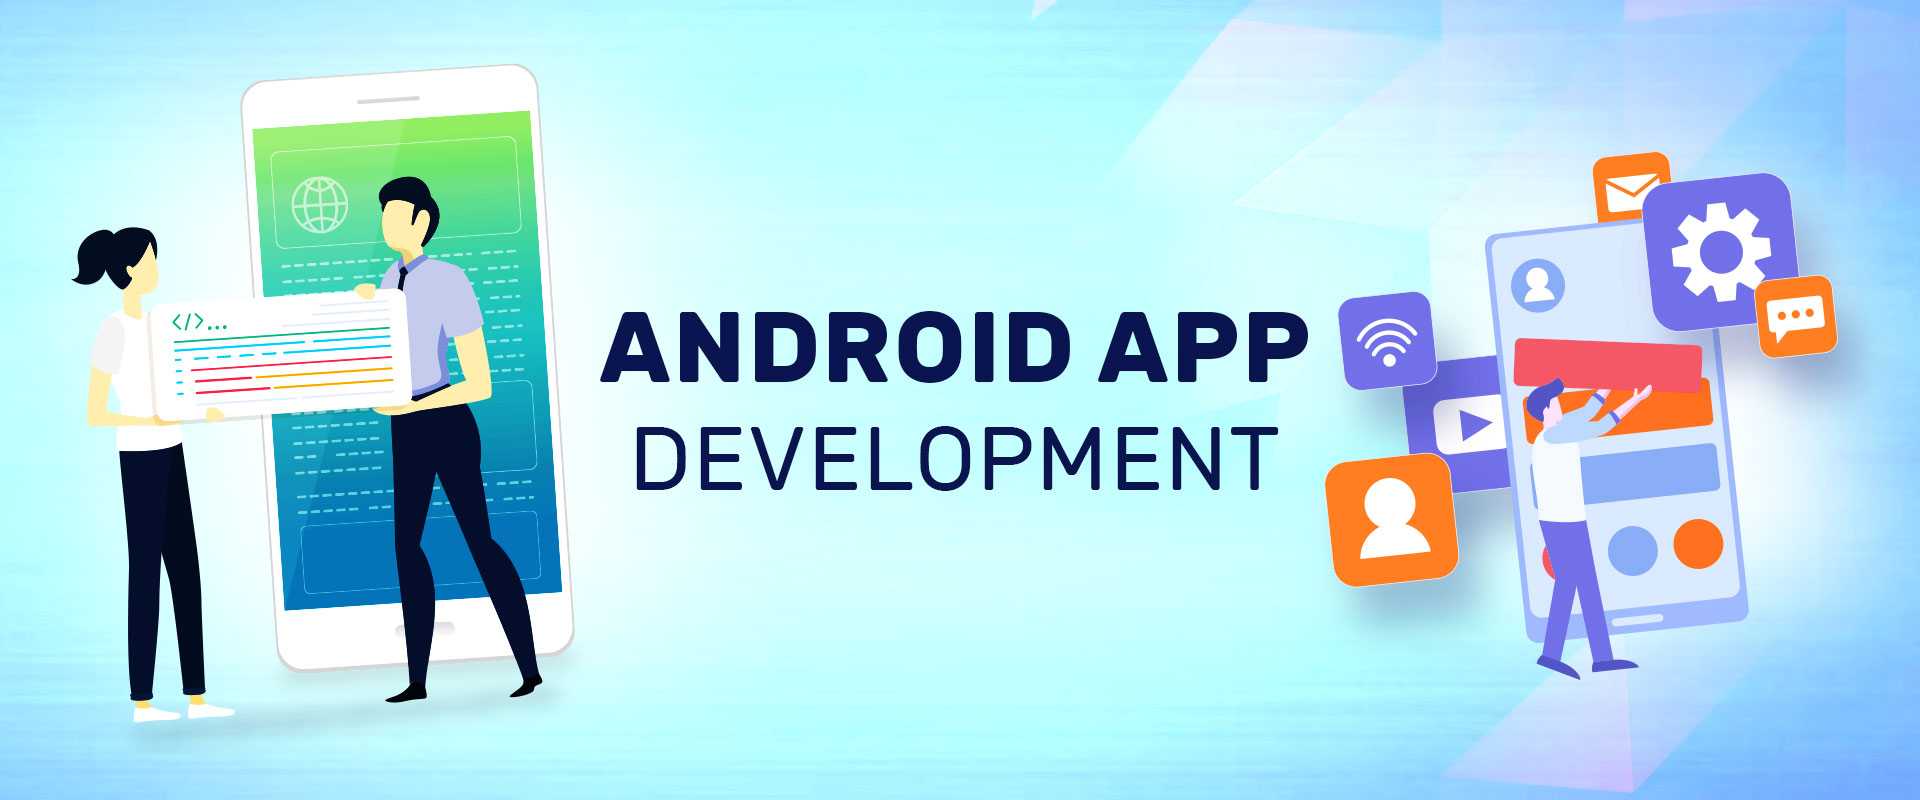 Android Application Development Noida aims to serve you with the best services